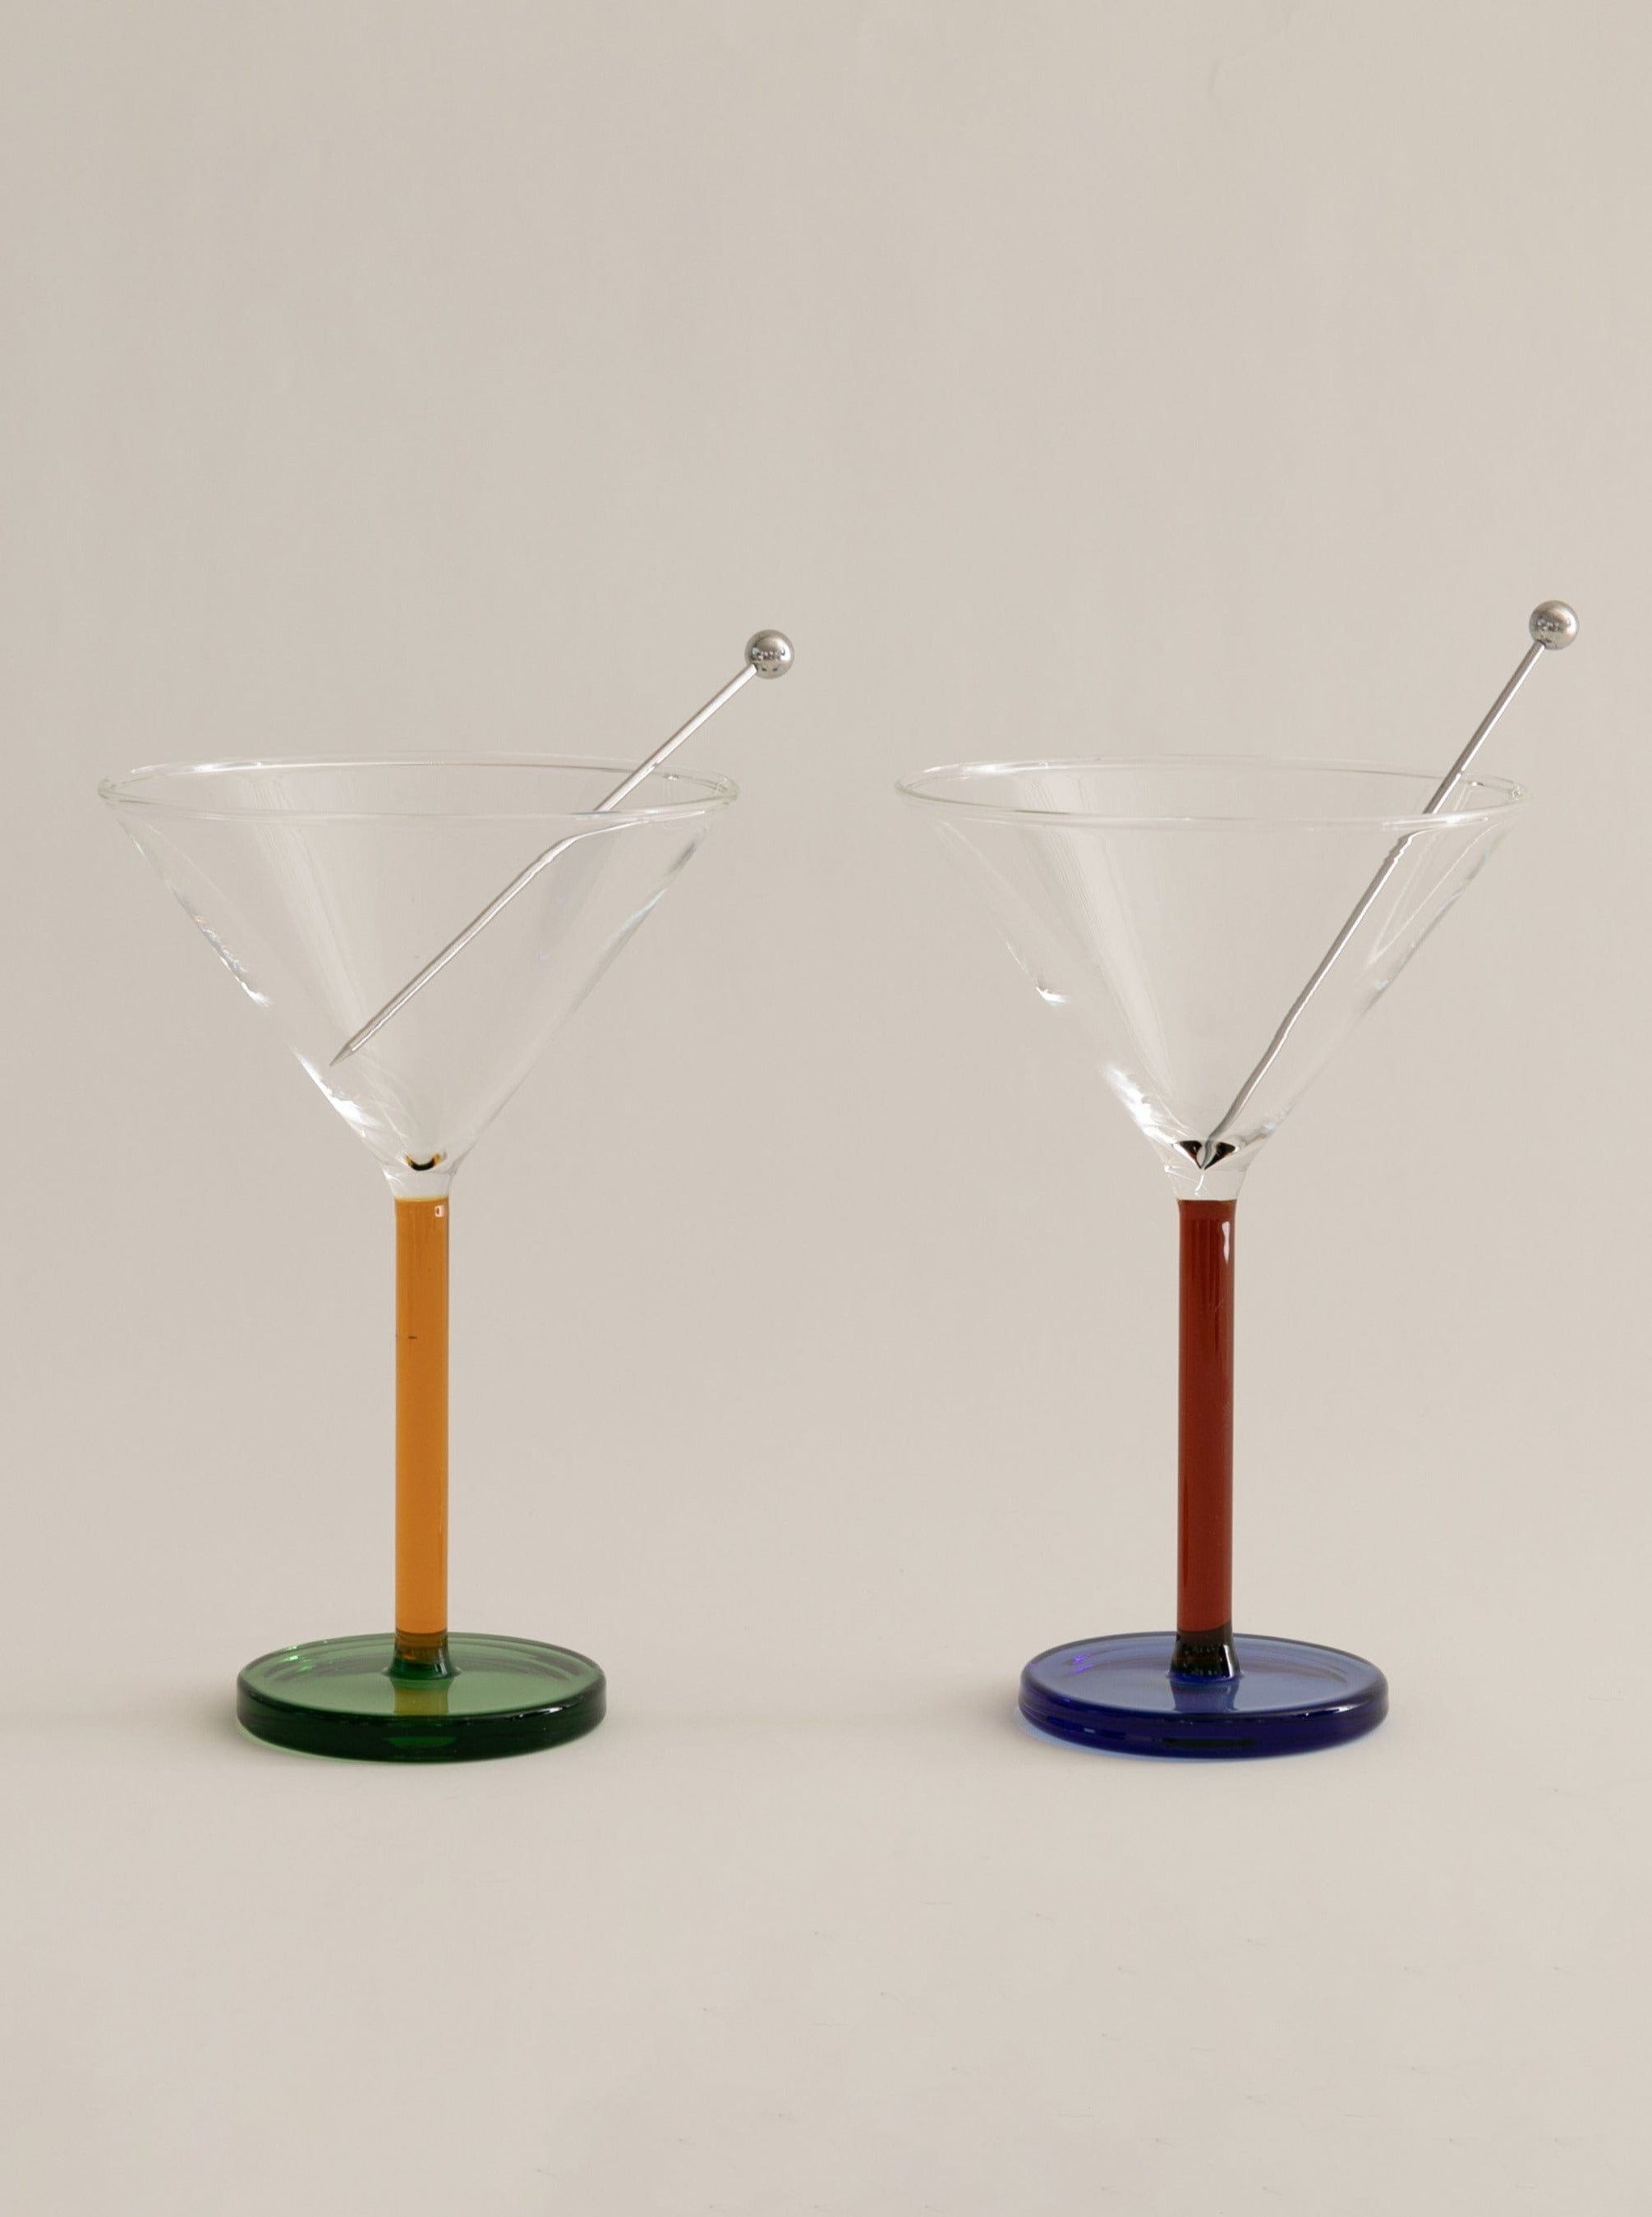 Two elegant Sophie Lou Jacobsen Piano Cocktail Glasses with clear bowls, green and blue bases, and decorative stainless steel garnish skewers on a neutral background.